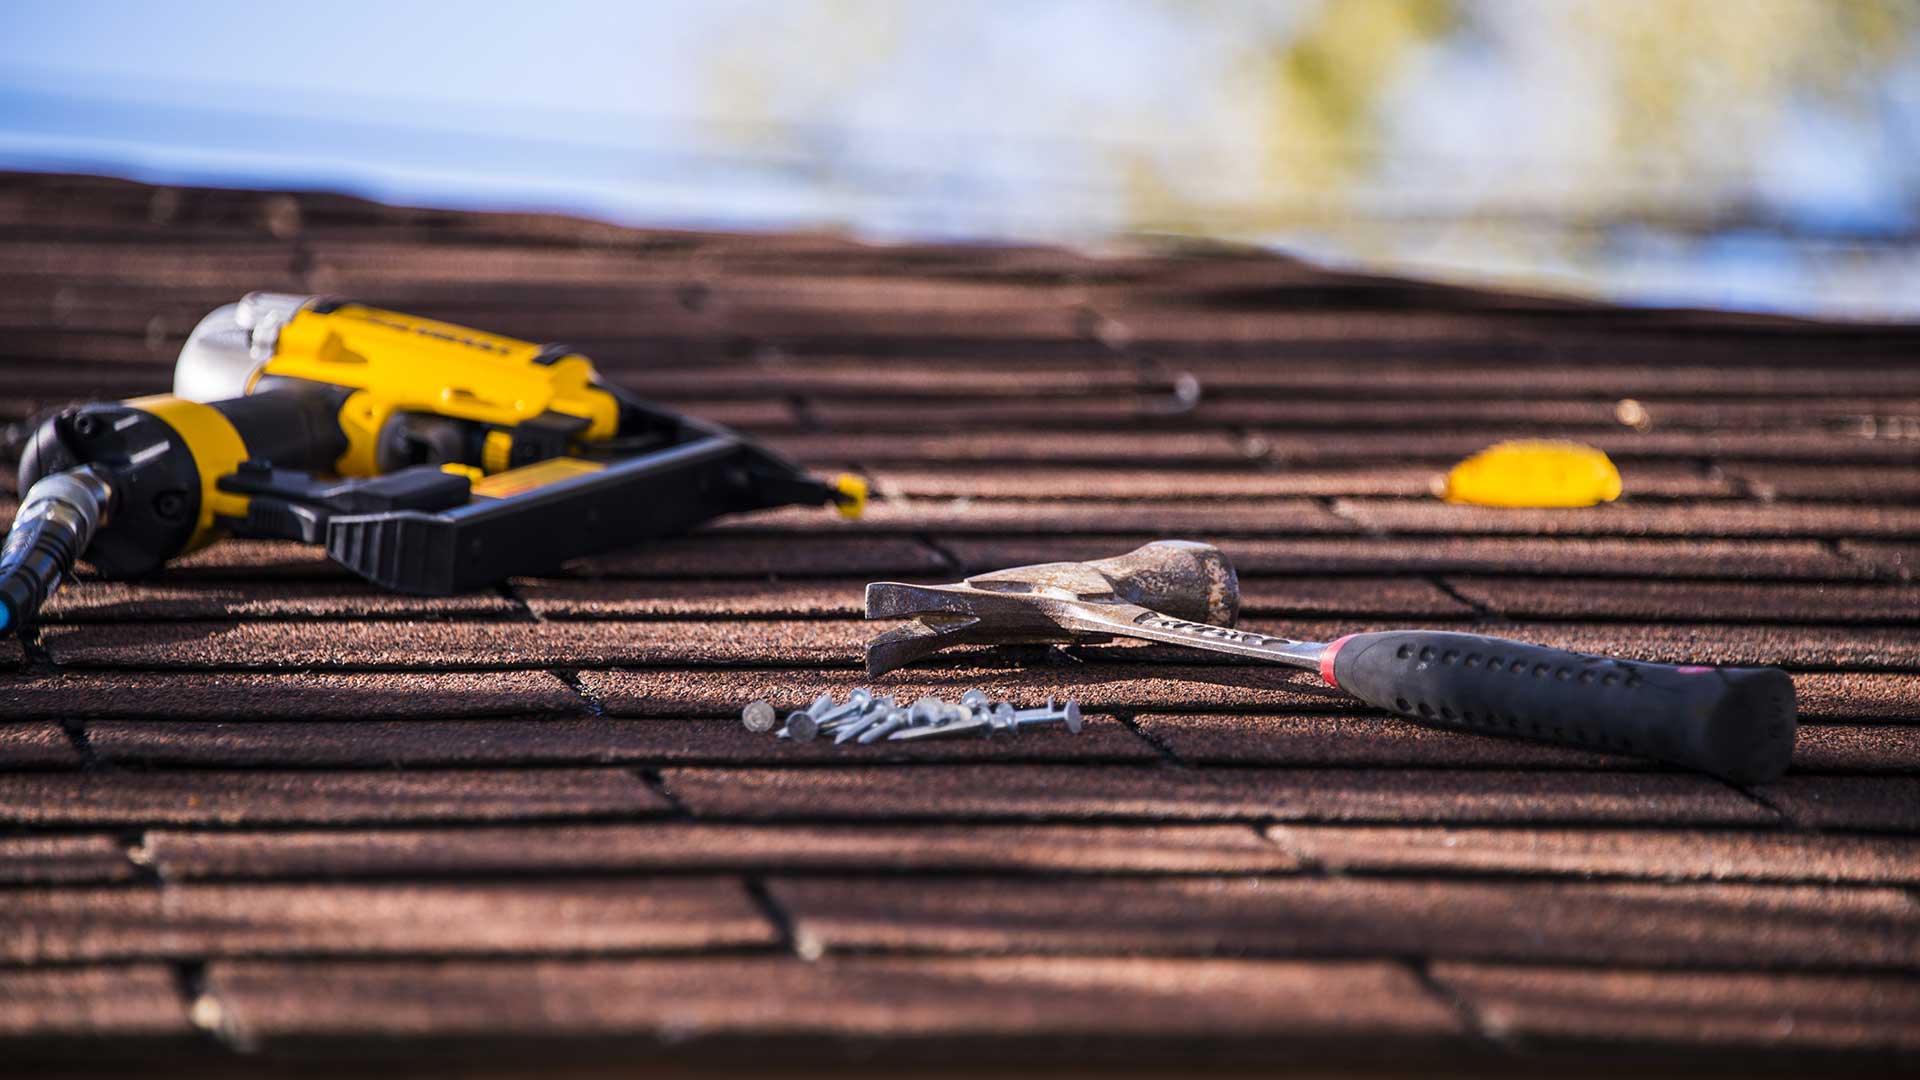 Providing Quality Roofing Services Since 1964